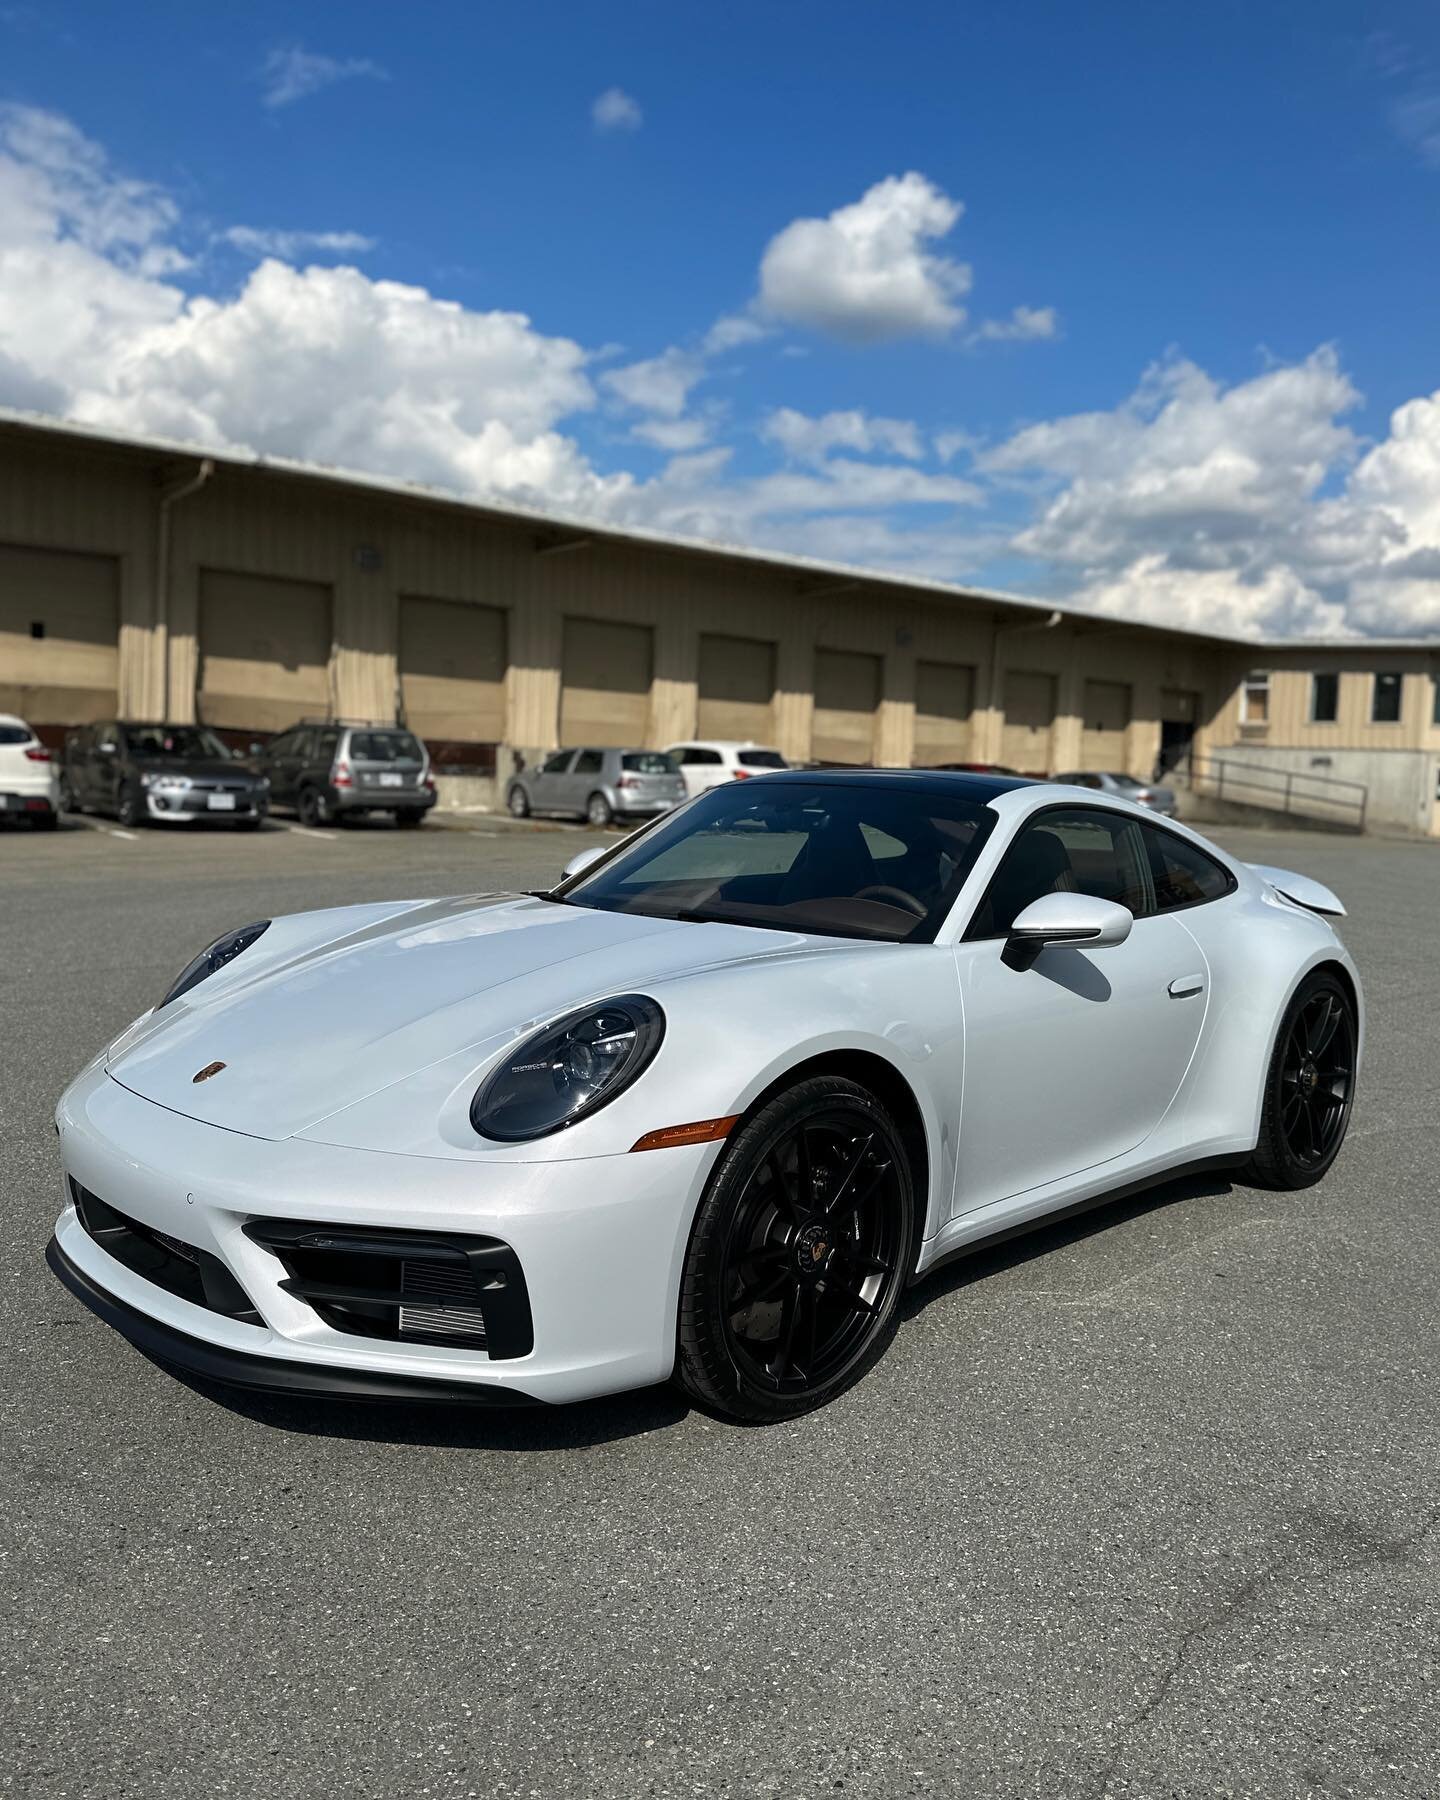 Porsche 911 Carrera GTS

Came in for our Signature Silver Package ✅

Detailed and ready for delivery 🏎️💨

For inquiries or bookings

Phone: 604-404-7225
Email: Washiewashiedetailing@gmail.com
Website: Washiewashie.ca